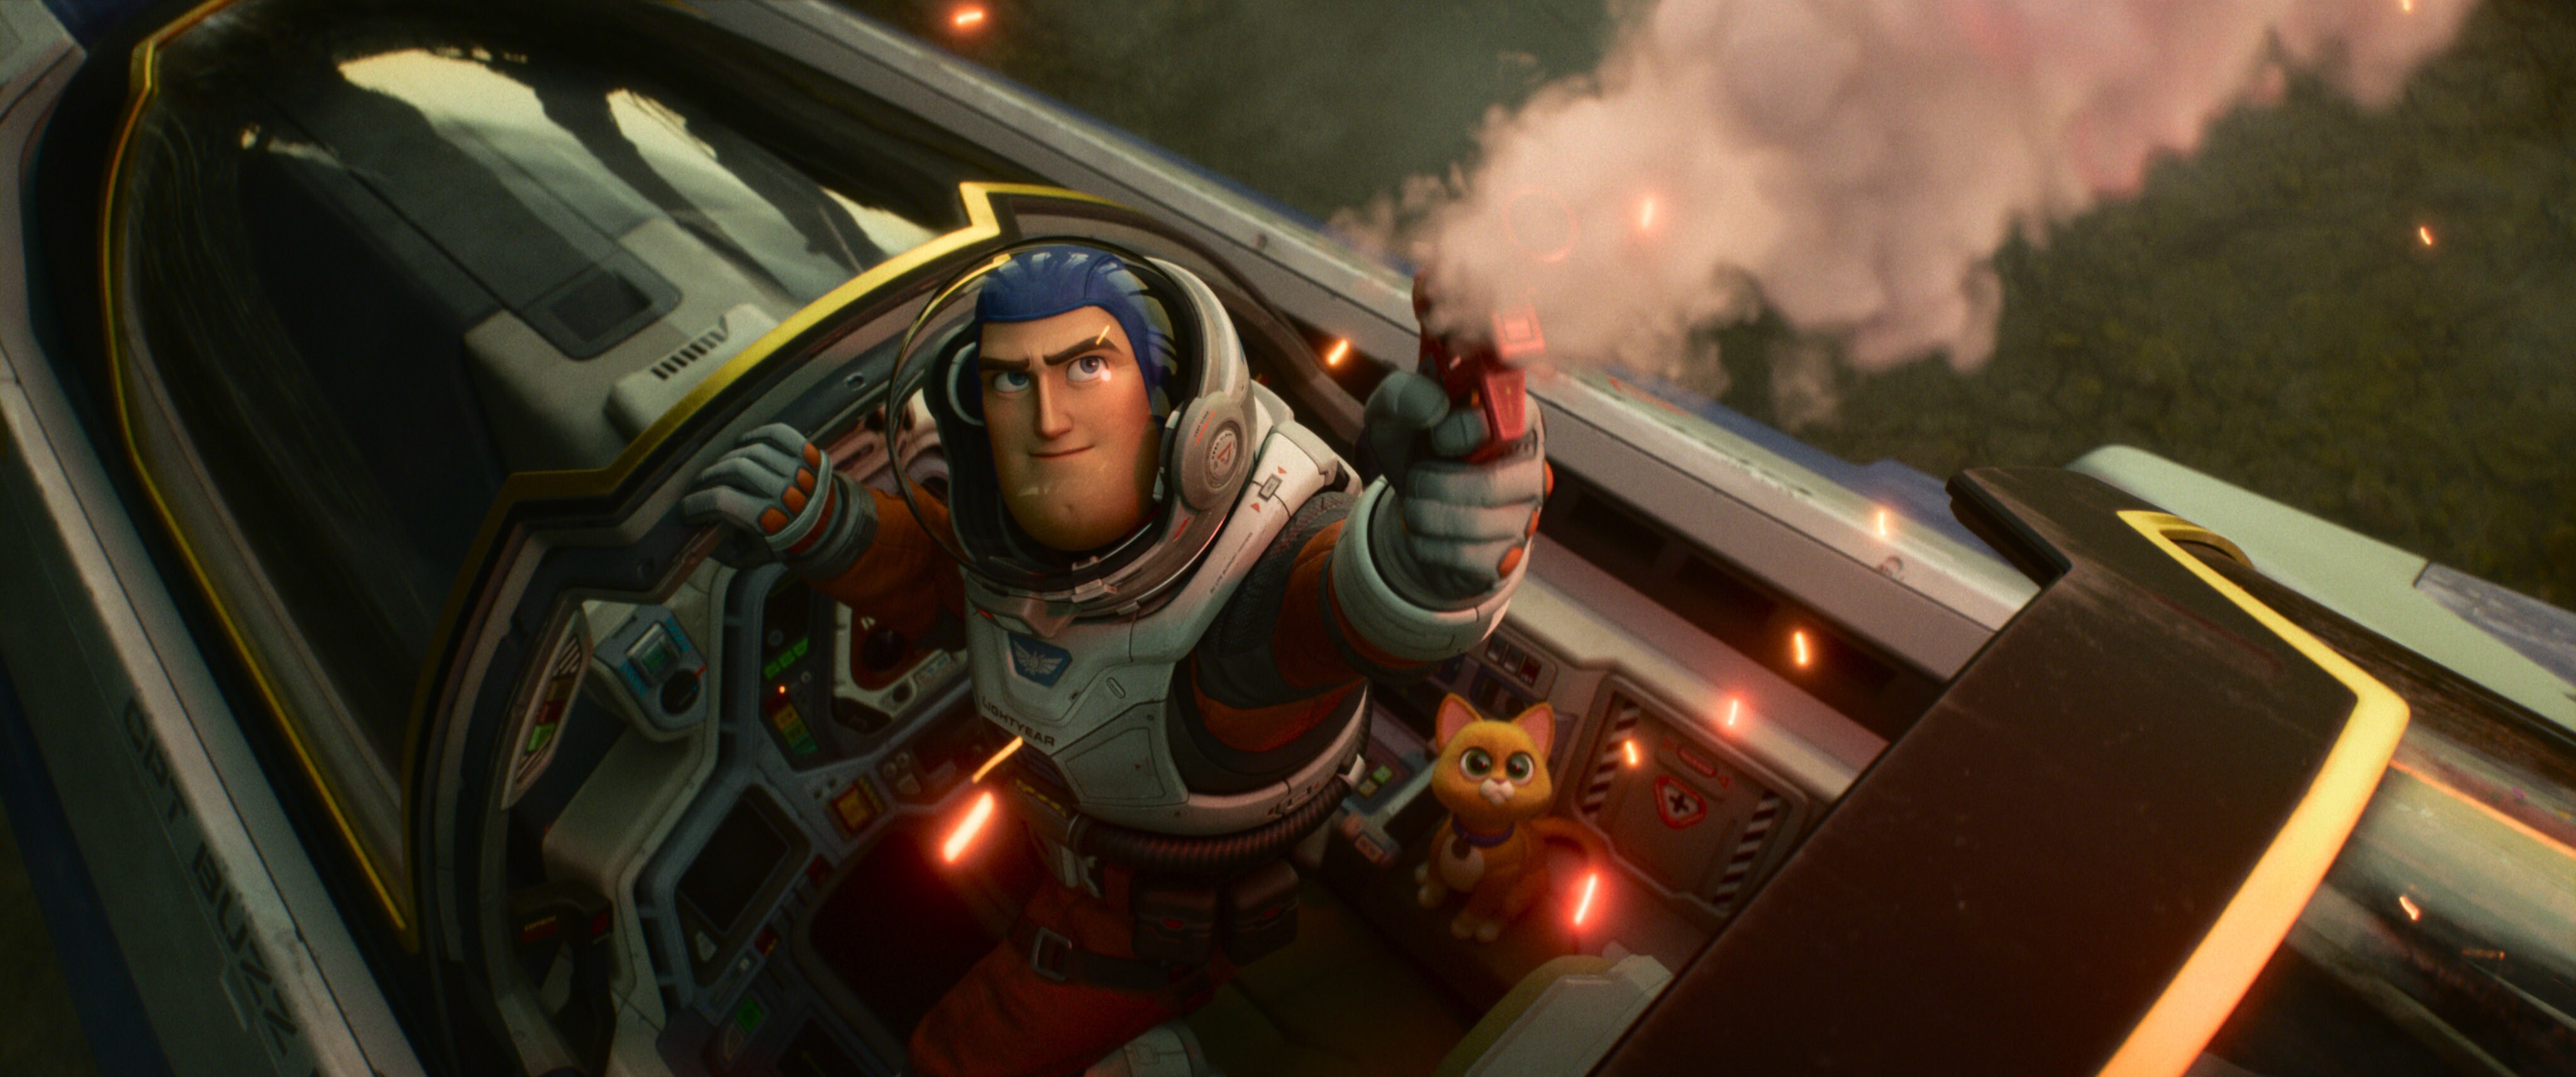 Buzz Lightyear stands up from his ship and sends up a flare